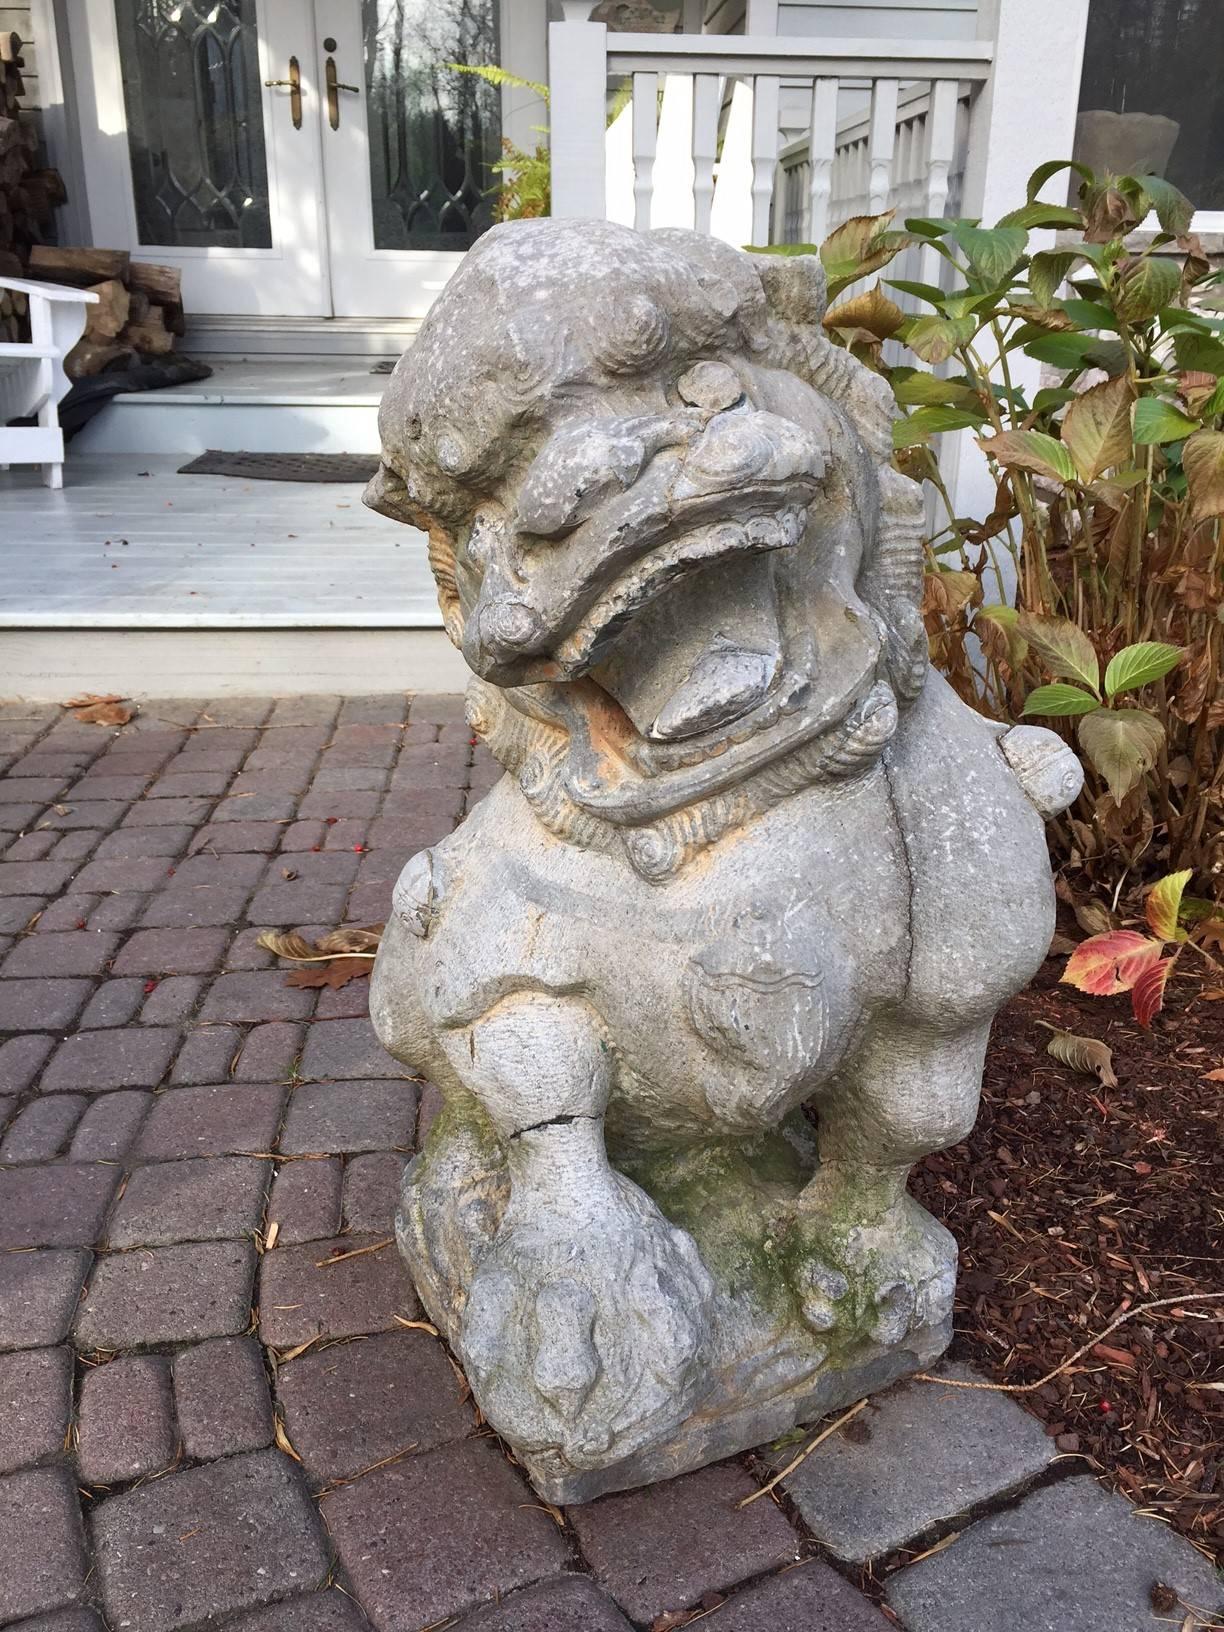 China- a nice pair of large antique hand-carved stone foo dog guardian lions carved about 100 years ago.

Dimensions:  They measure 30 inches  high and 23 inches wide each. 

Provenance: Old New England collection.

This is a one-of-a-kind treasure